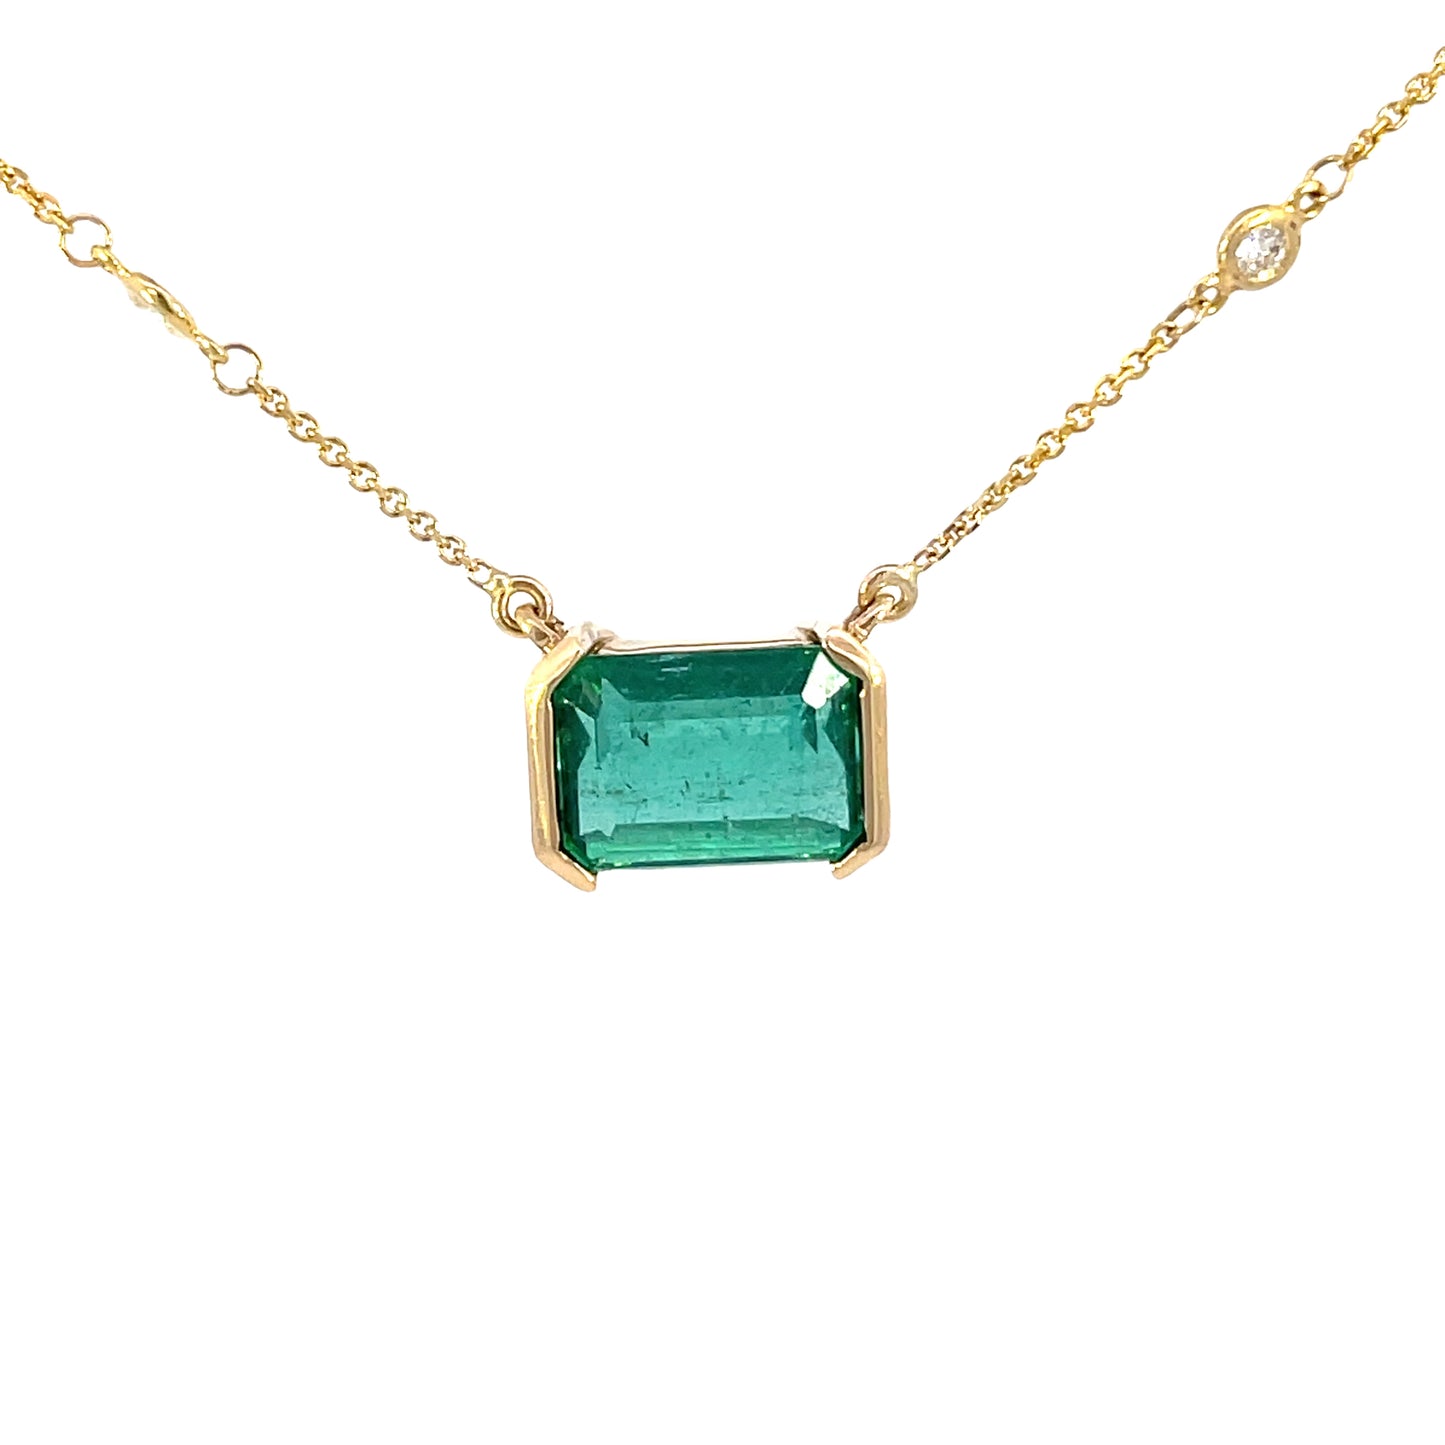 Emerald cut Emerald and Diamonds by the yard necklace-J35297